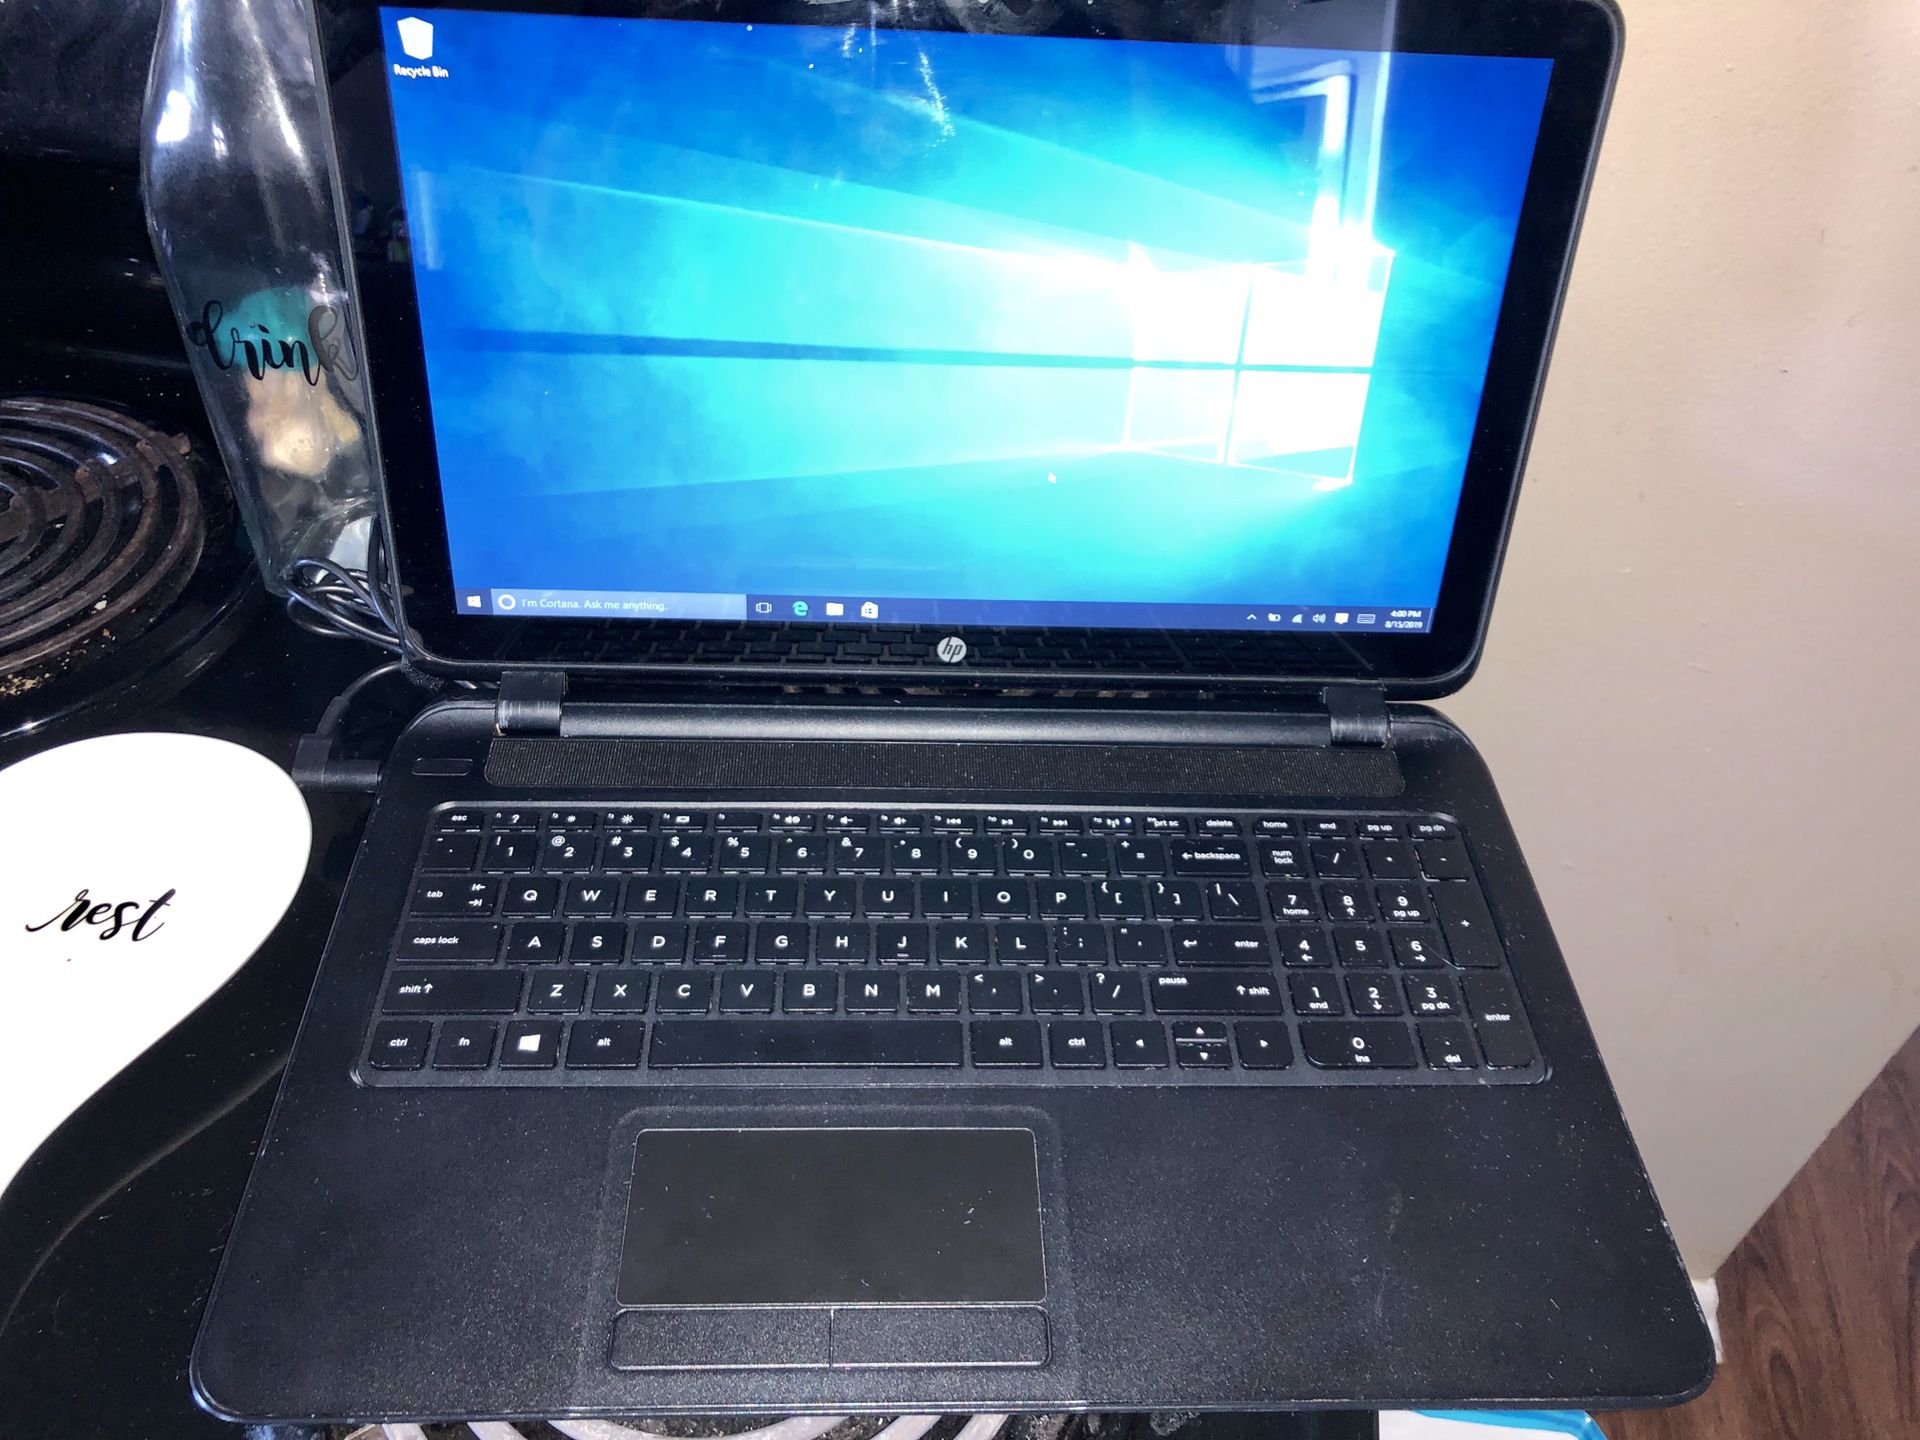 Touch screen HP laptop 4GB ram with charger very nice just factory reset and updated! Screen is in great condition no scratches works perfect all t